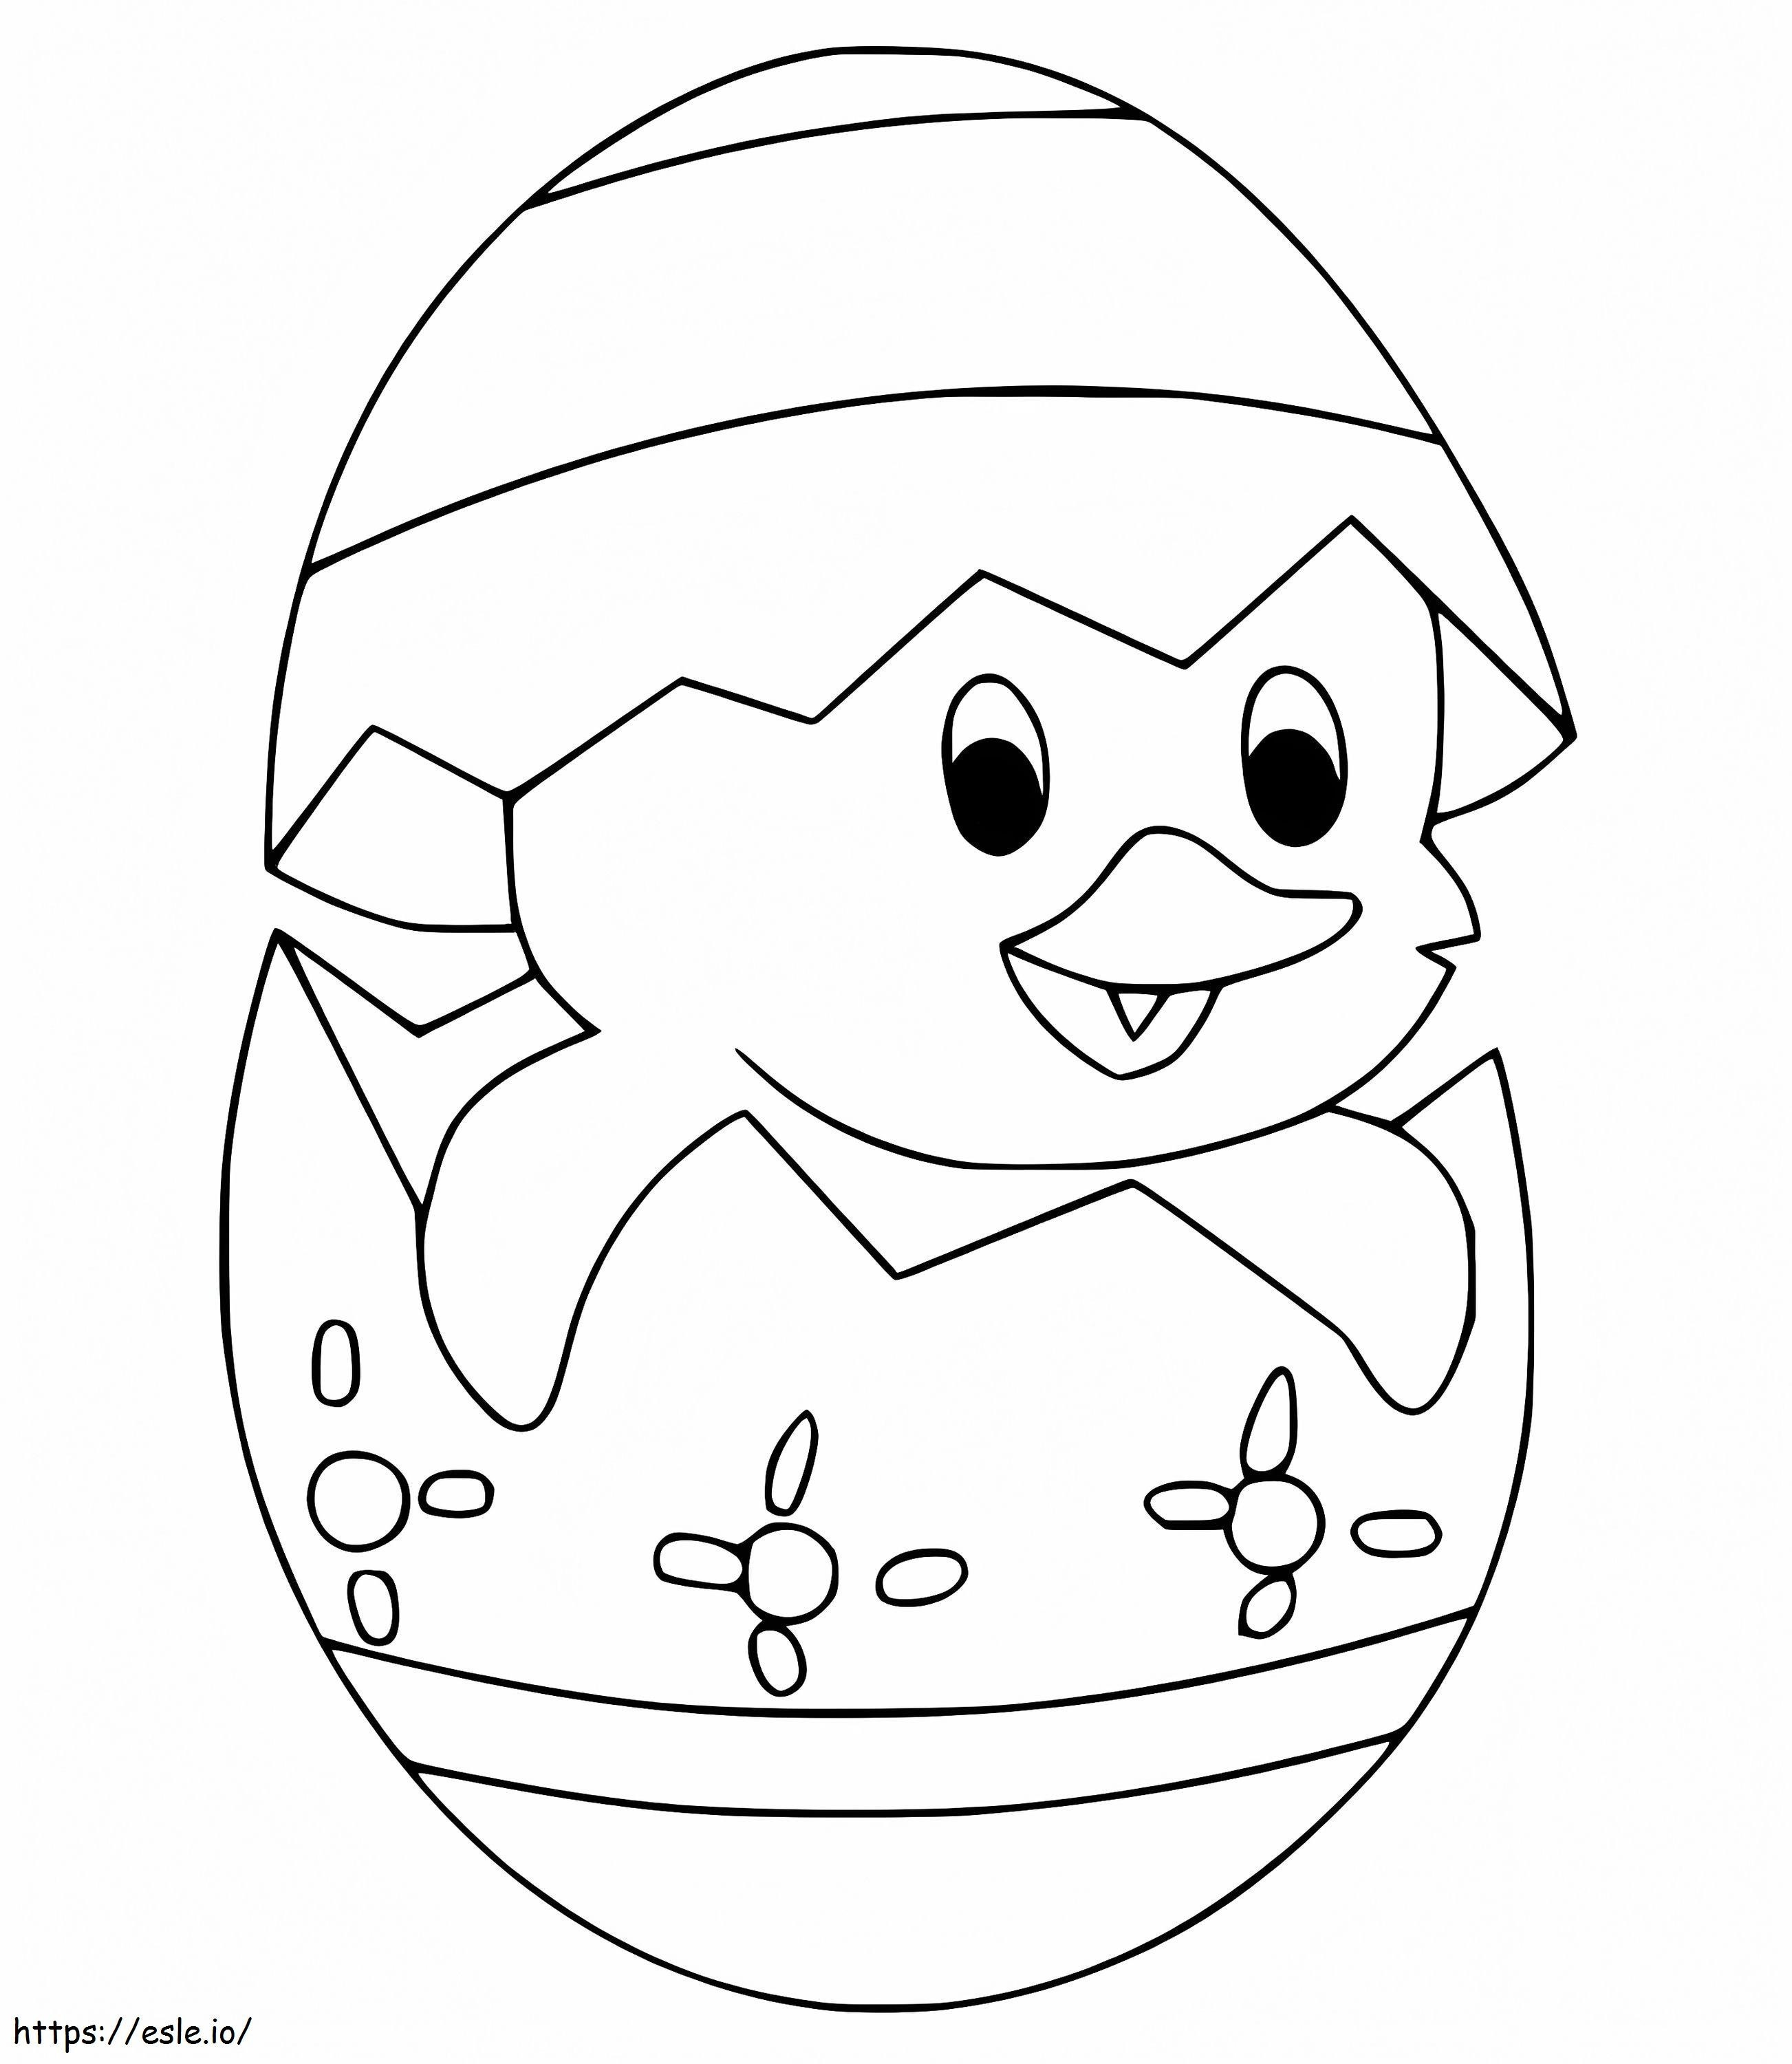 Lovely Easter Chick coloring page